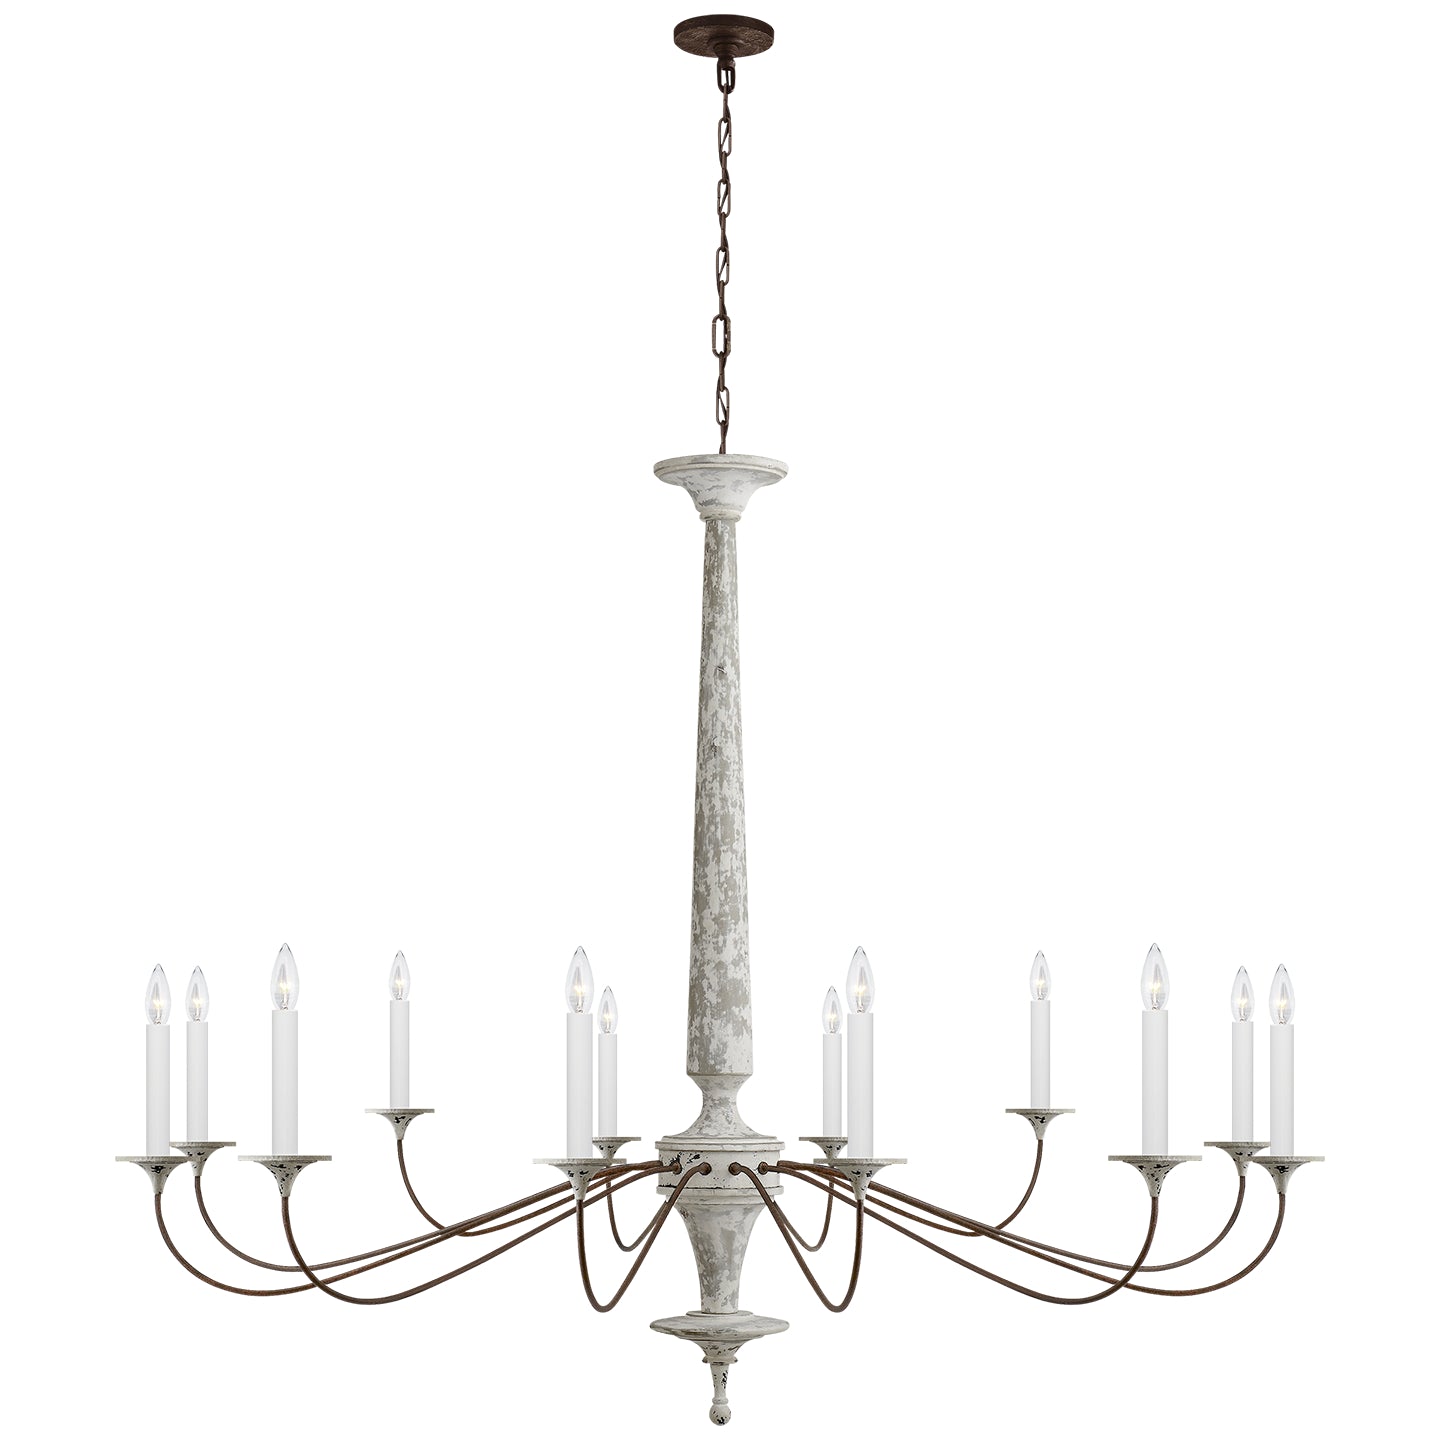 Visual Comfort Signature - SK 5350SWH/NR - 12 Light Chandelier - Bordeaux - Swedish White and Natural Rust